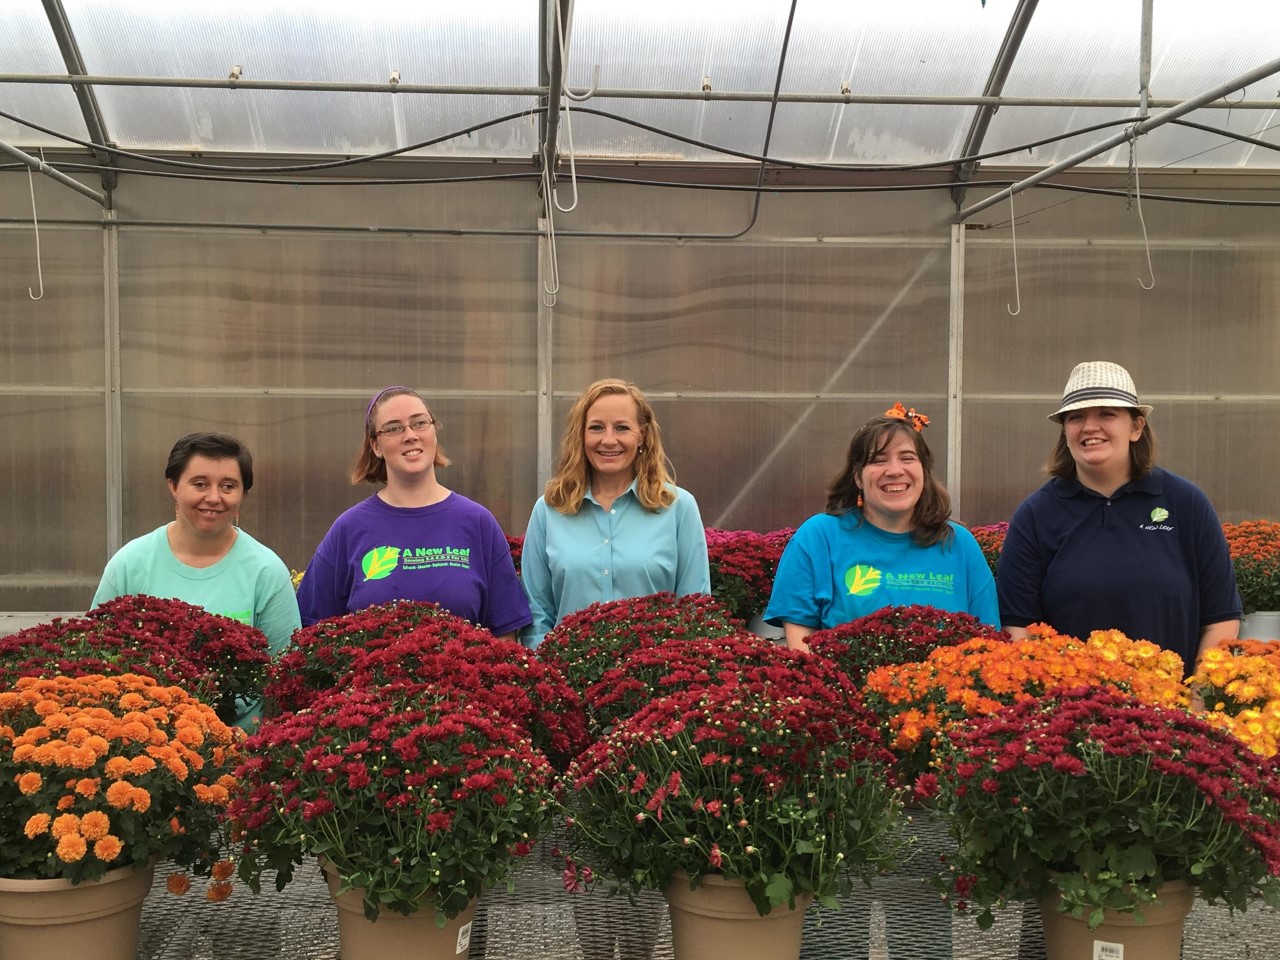 One of the many jobs at A New Leaf includes caring for the plants yearlong in our six greenhouses.  